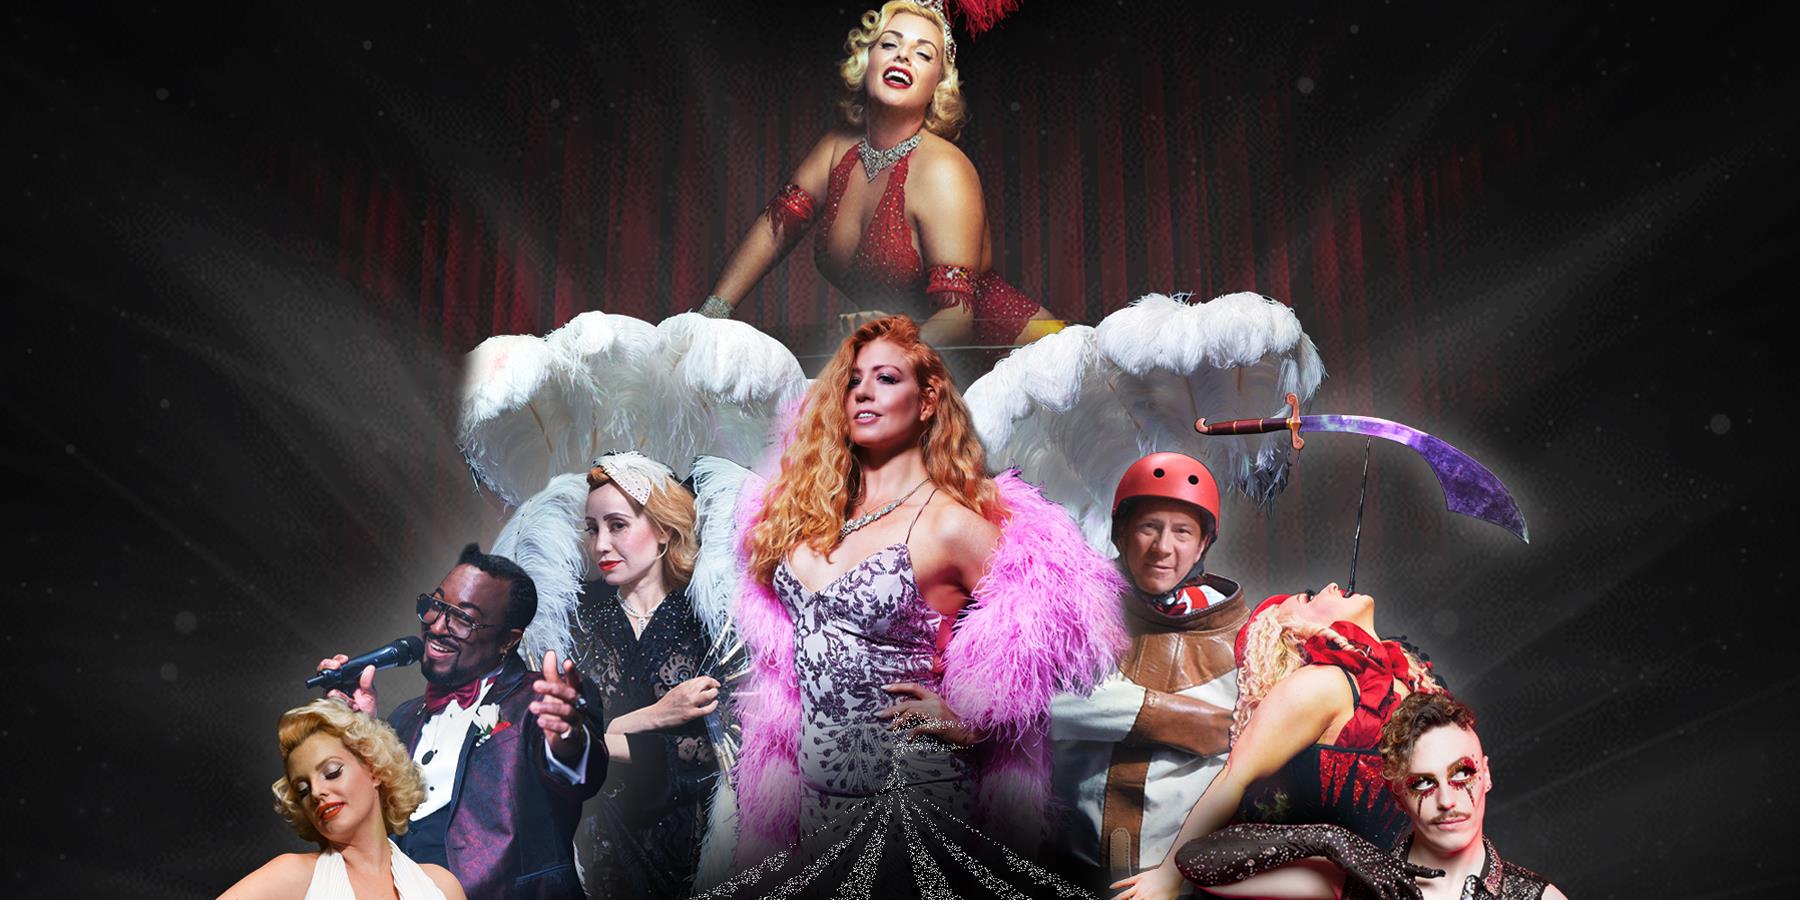 A collage of burlesque performers